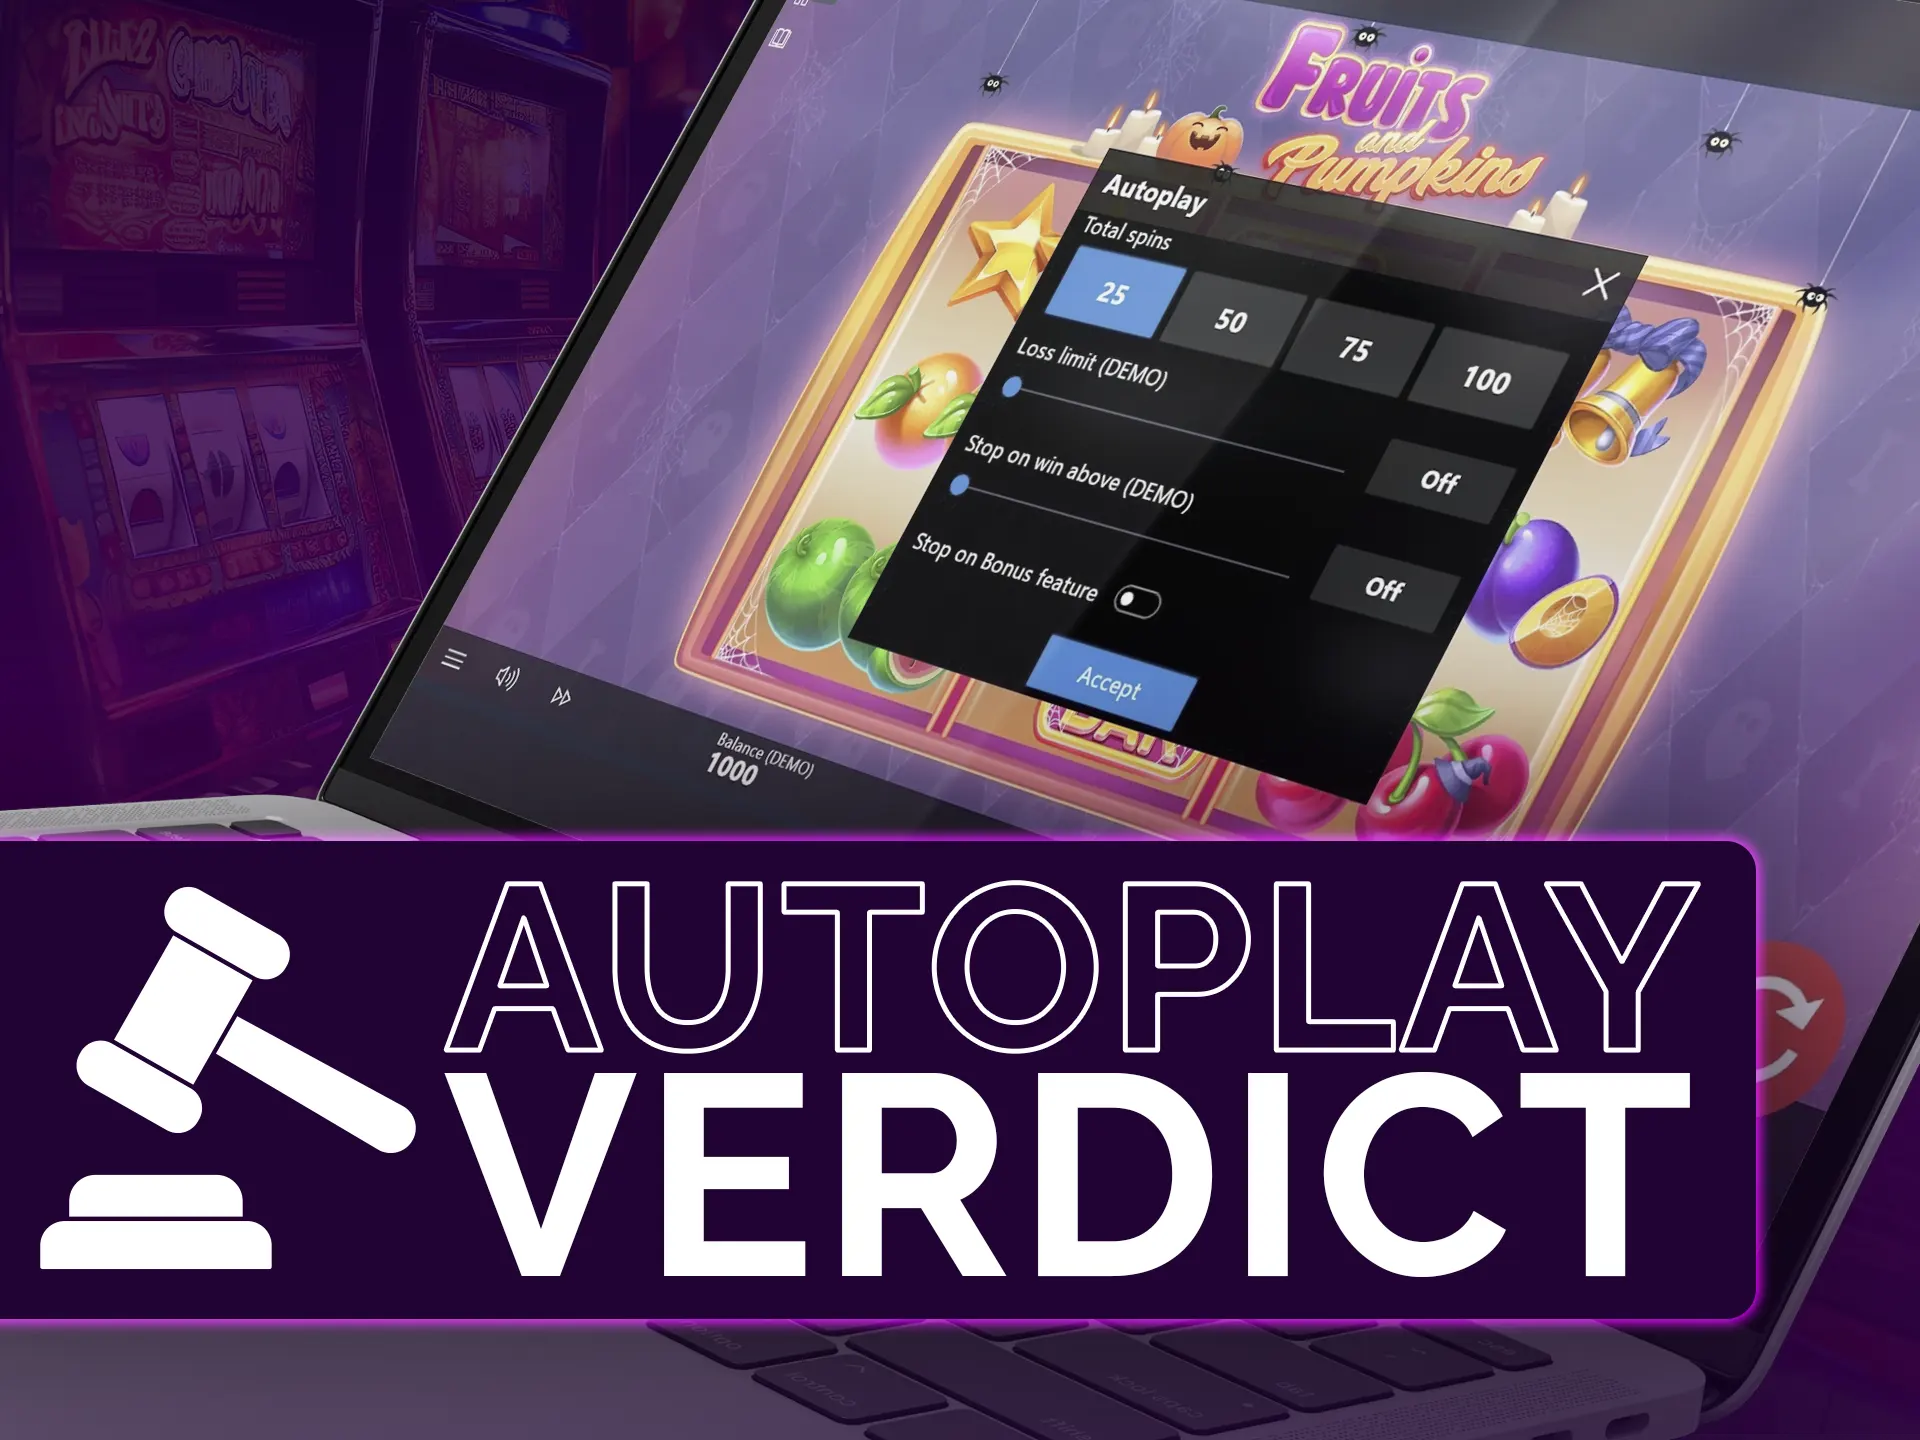 Autoplay slots offer hands-free play for convenience, not influencing outcomes.